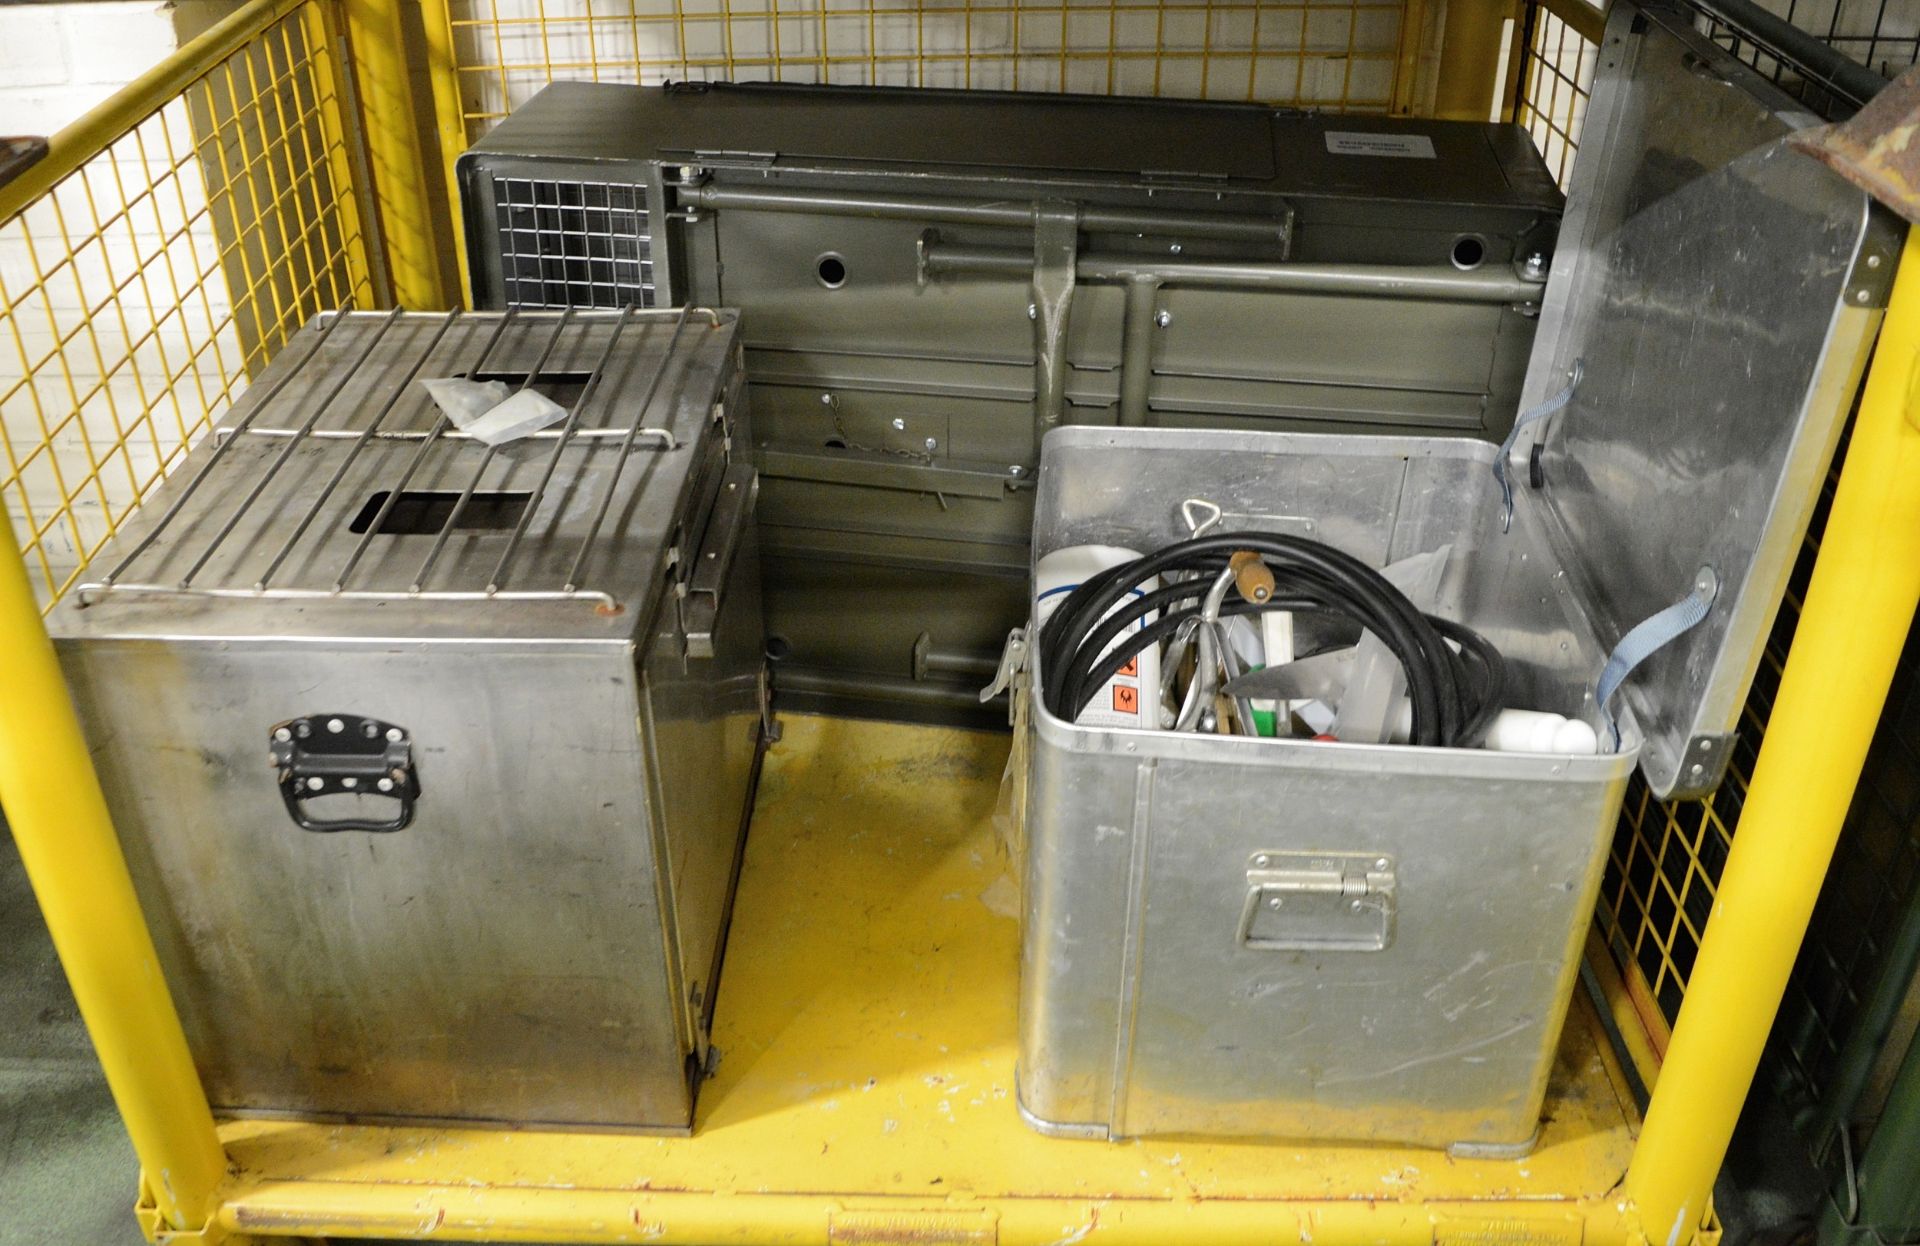 Field Kitchen set - cooker, oven, utensil set in carry box, norweigen food boxes, accessor - Image 2 of 3